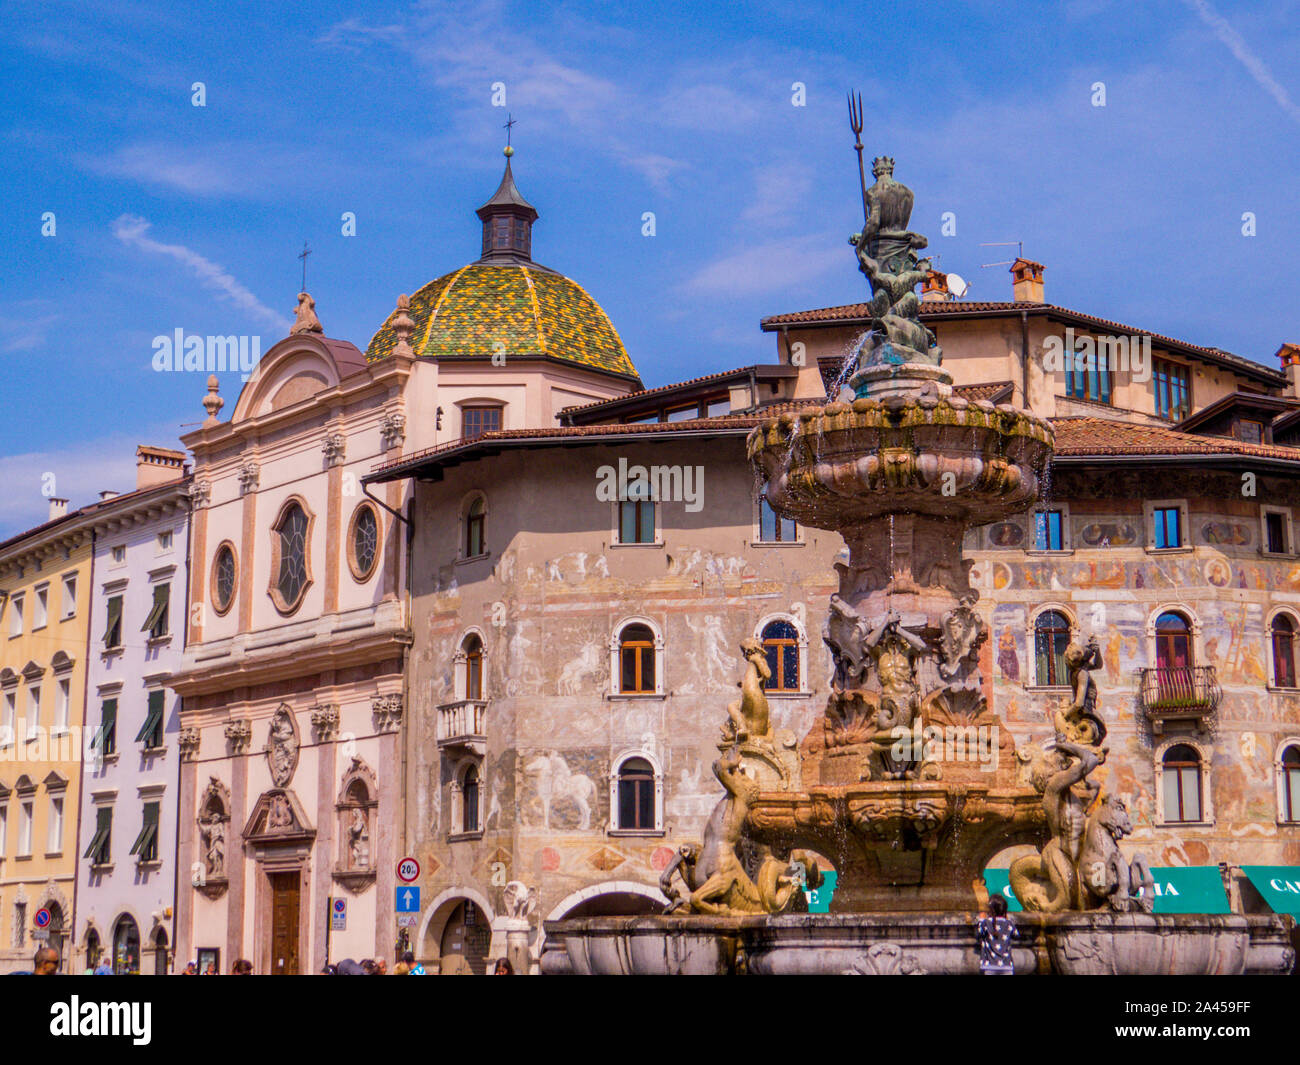 View of the Piazza Duomo and the Fountain of Neptune in Trento, Italy Stock Photo